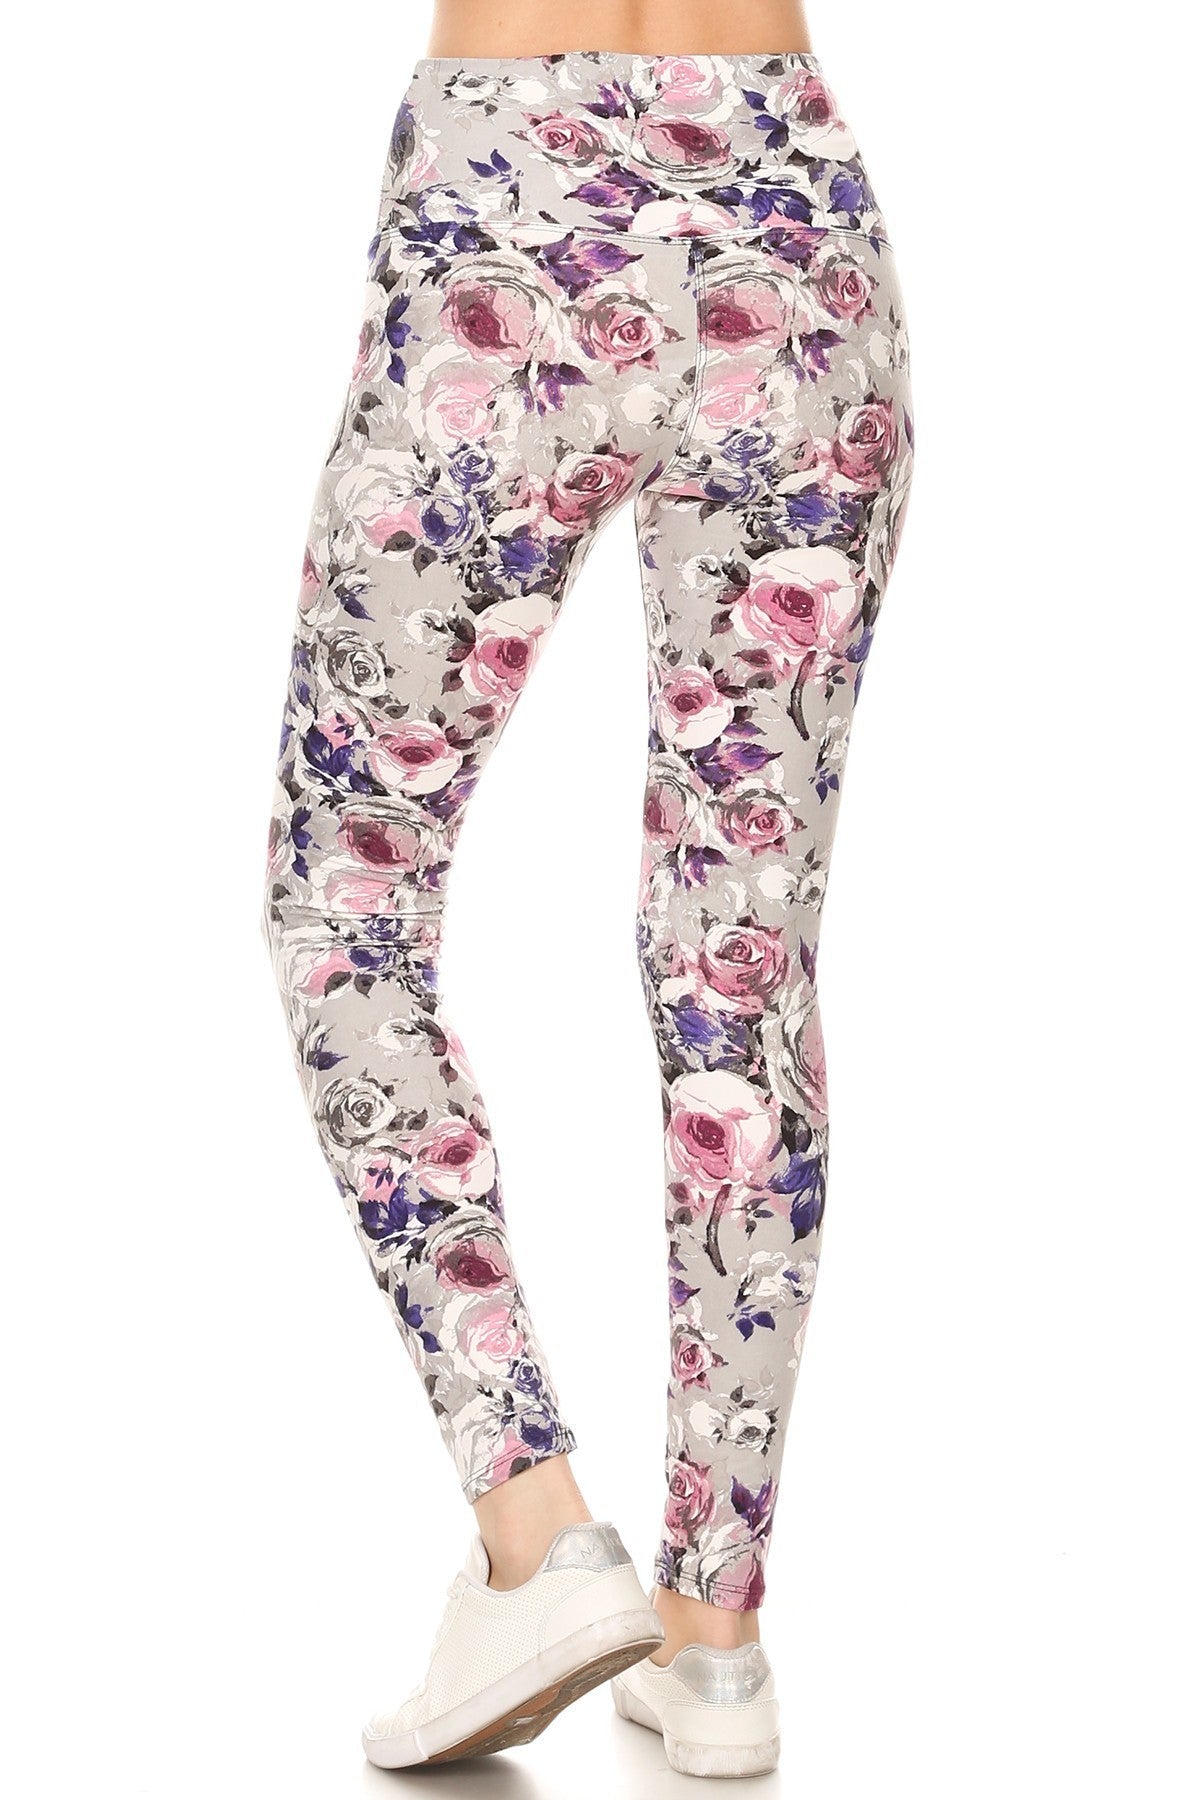 5-inch Long Yoga Style Banded Lined Floral Printed Knit Legging With High Waist Smile Sparker